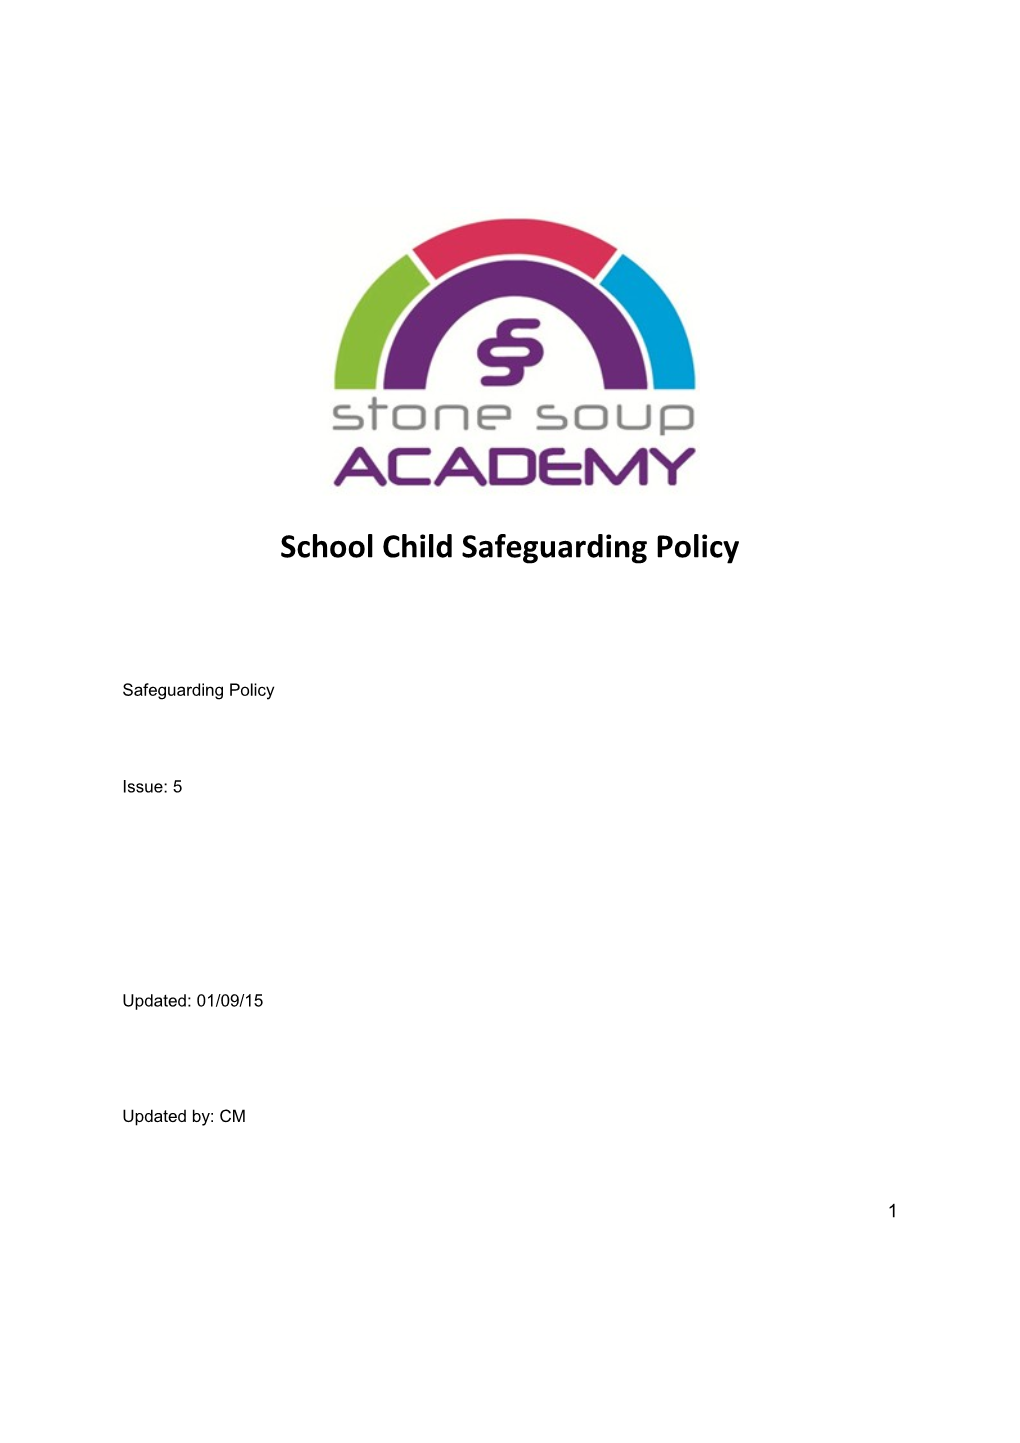 School Child Safeguarding Policy